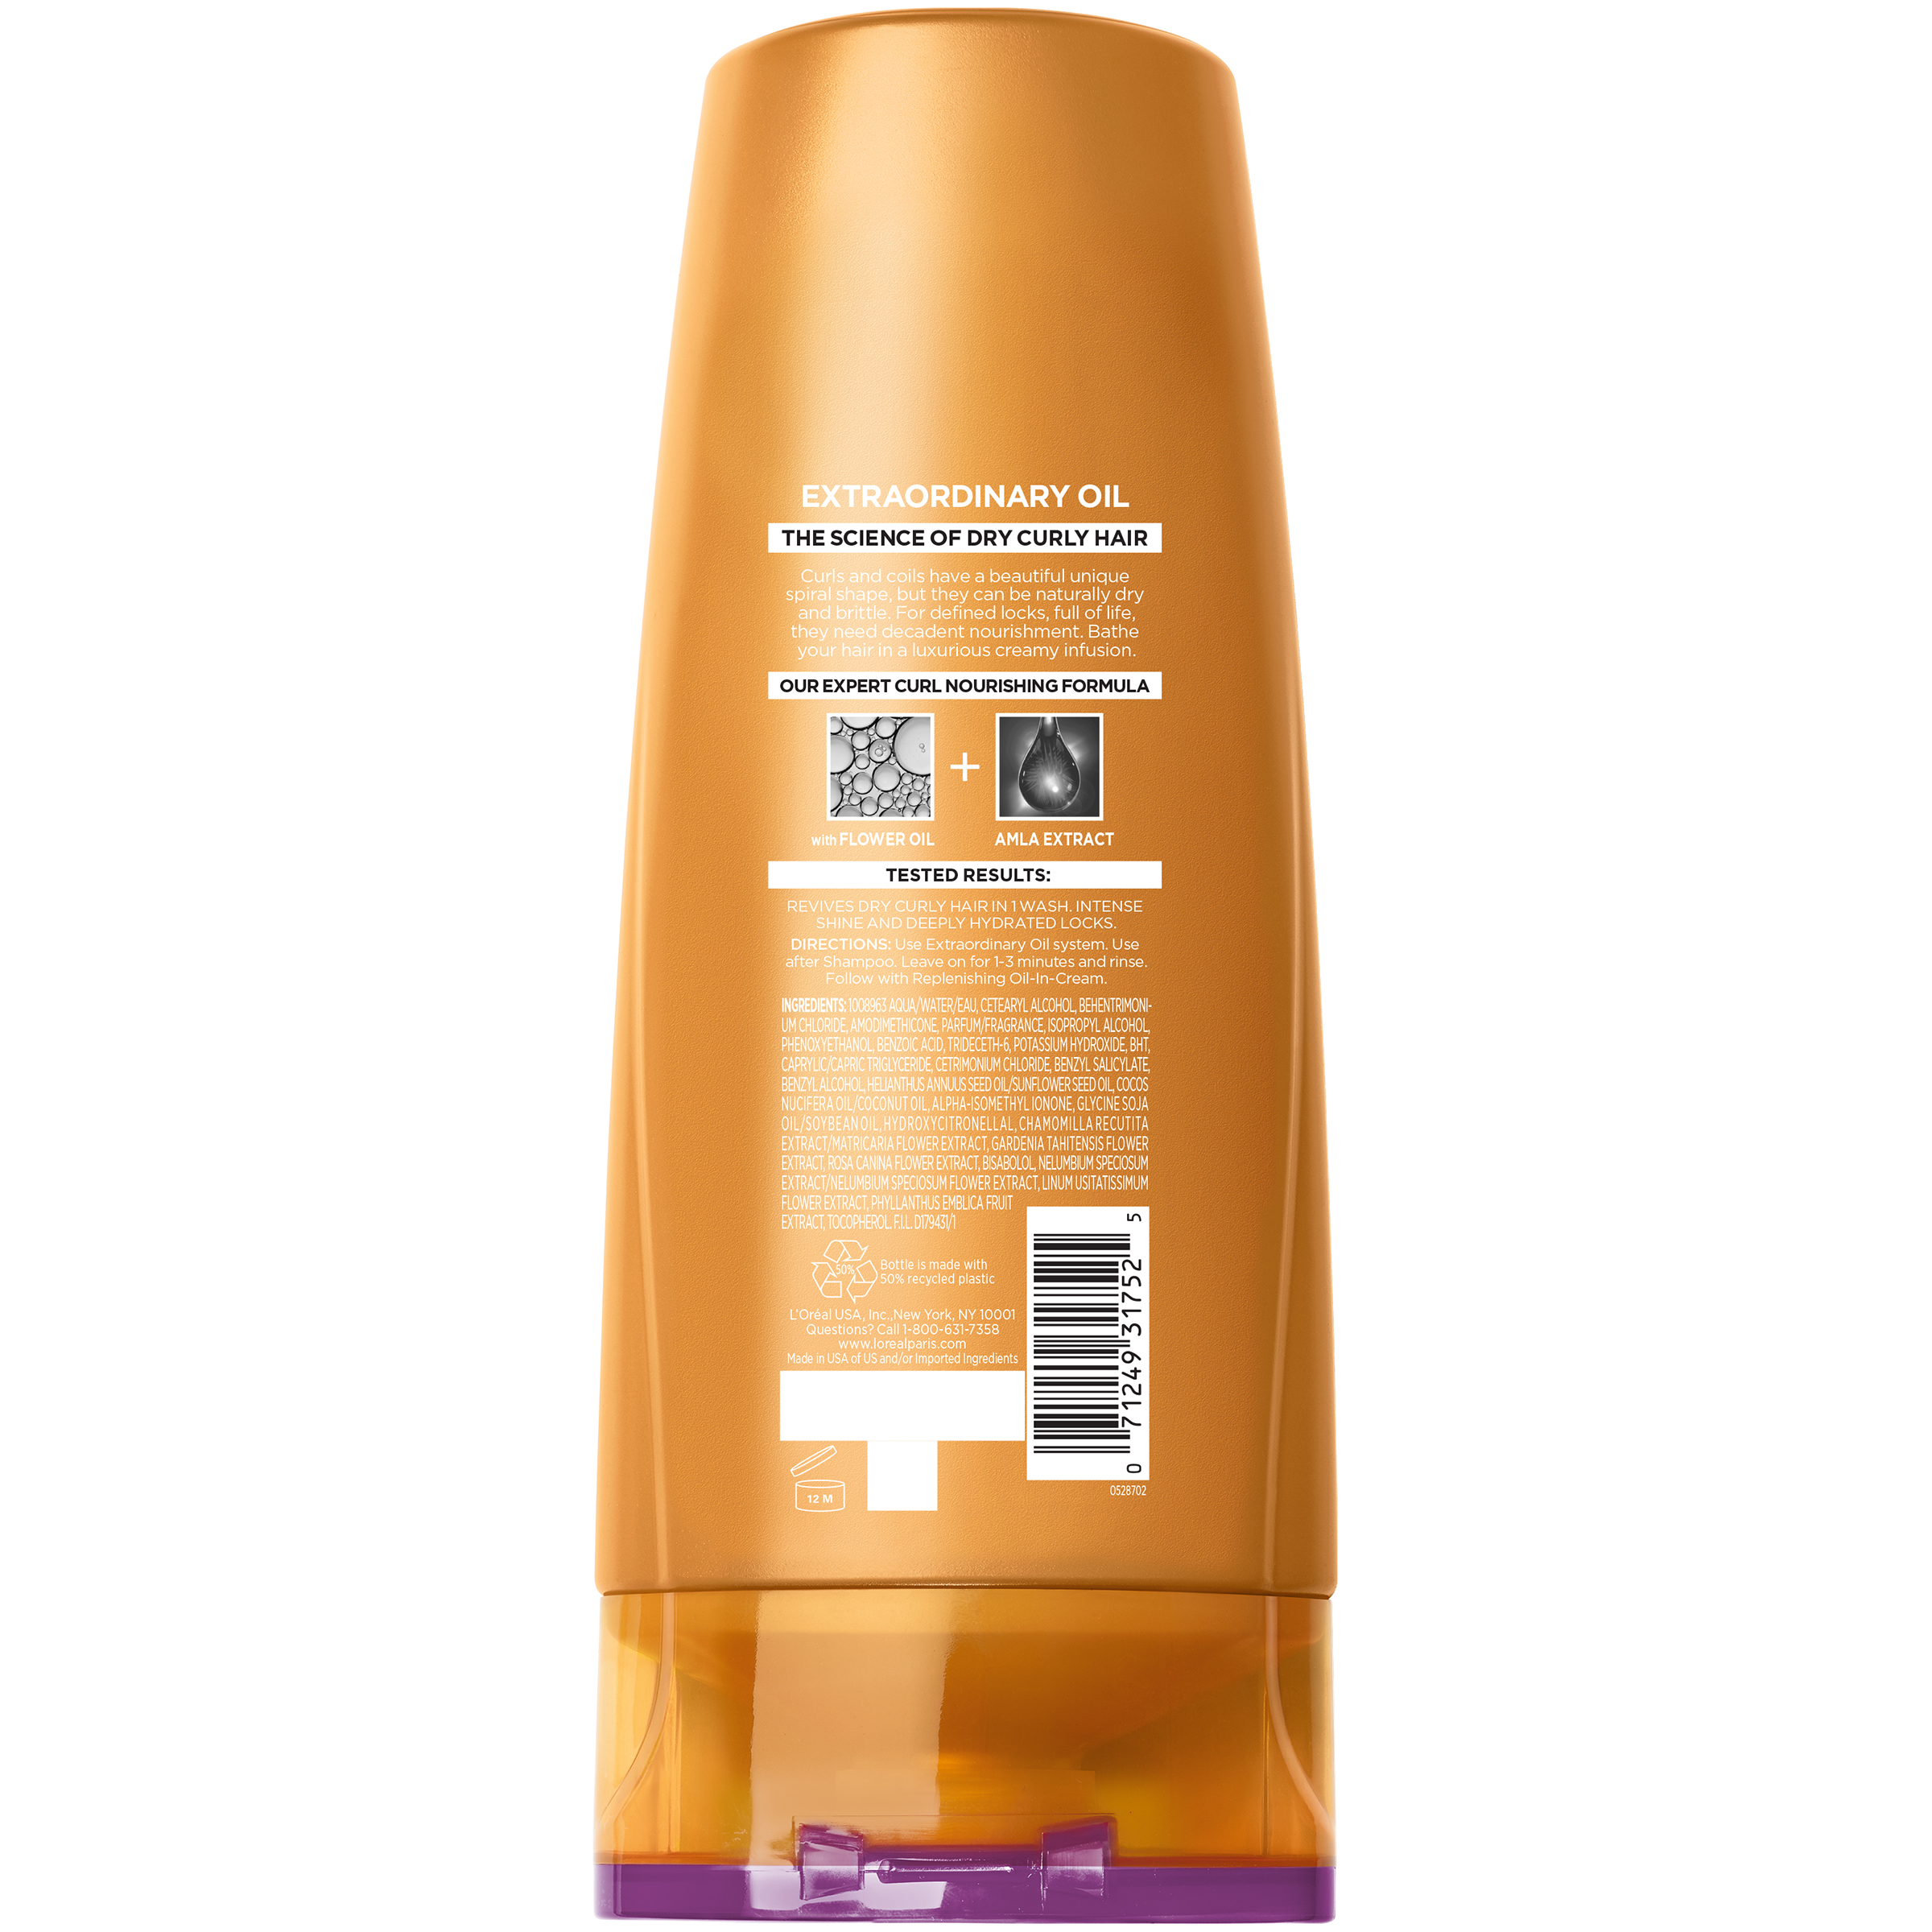 L'Oreal Paris Elvive Extraordinary Oil Conditioner for Curly Hair, 12.6 oz - image 4 of 6